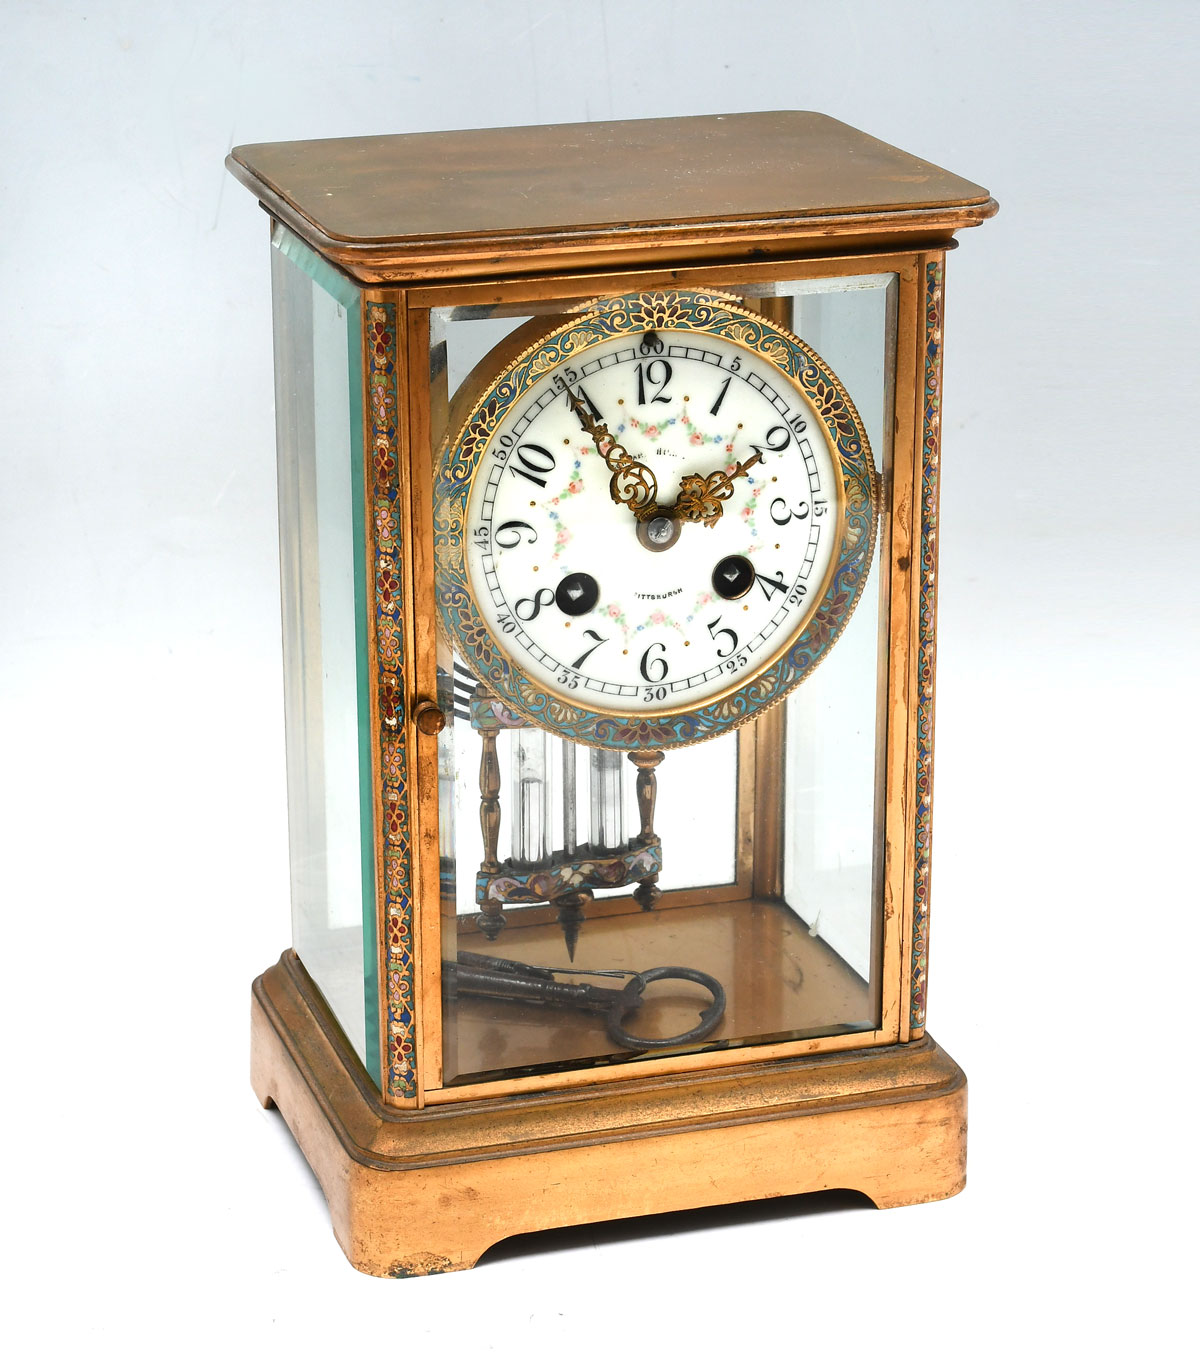 GILT FRENCH CLOISONNE CLOCK: Early